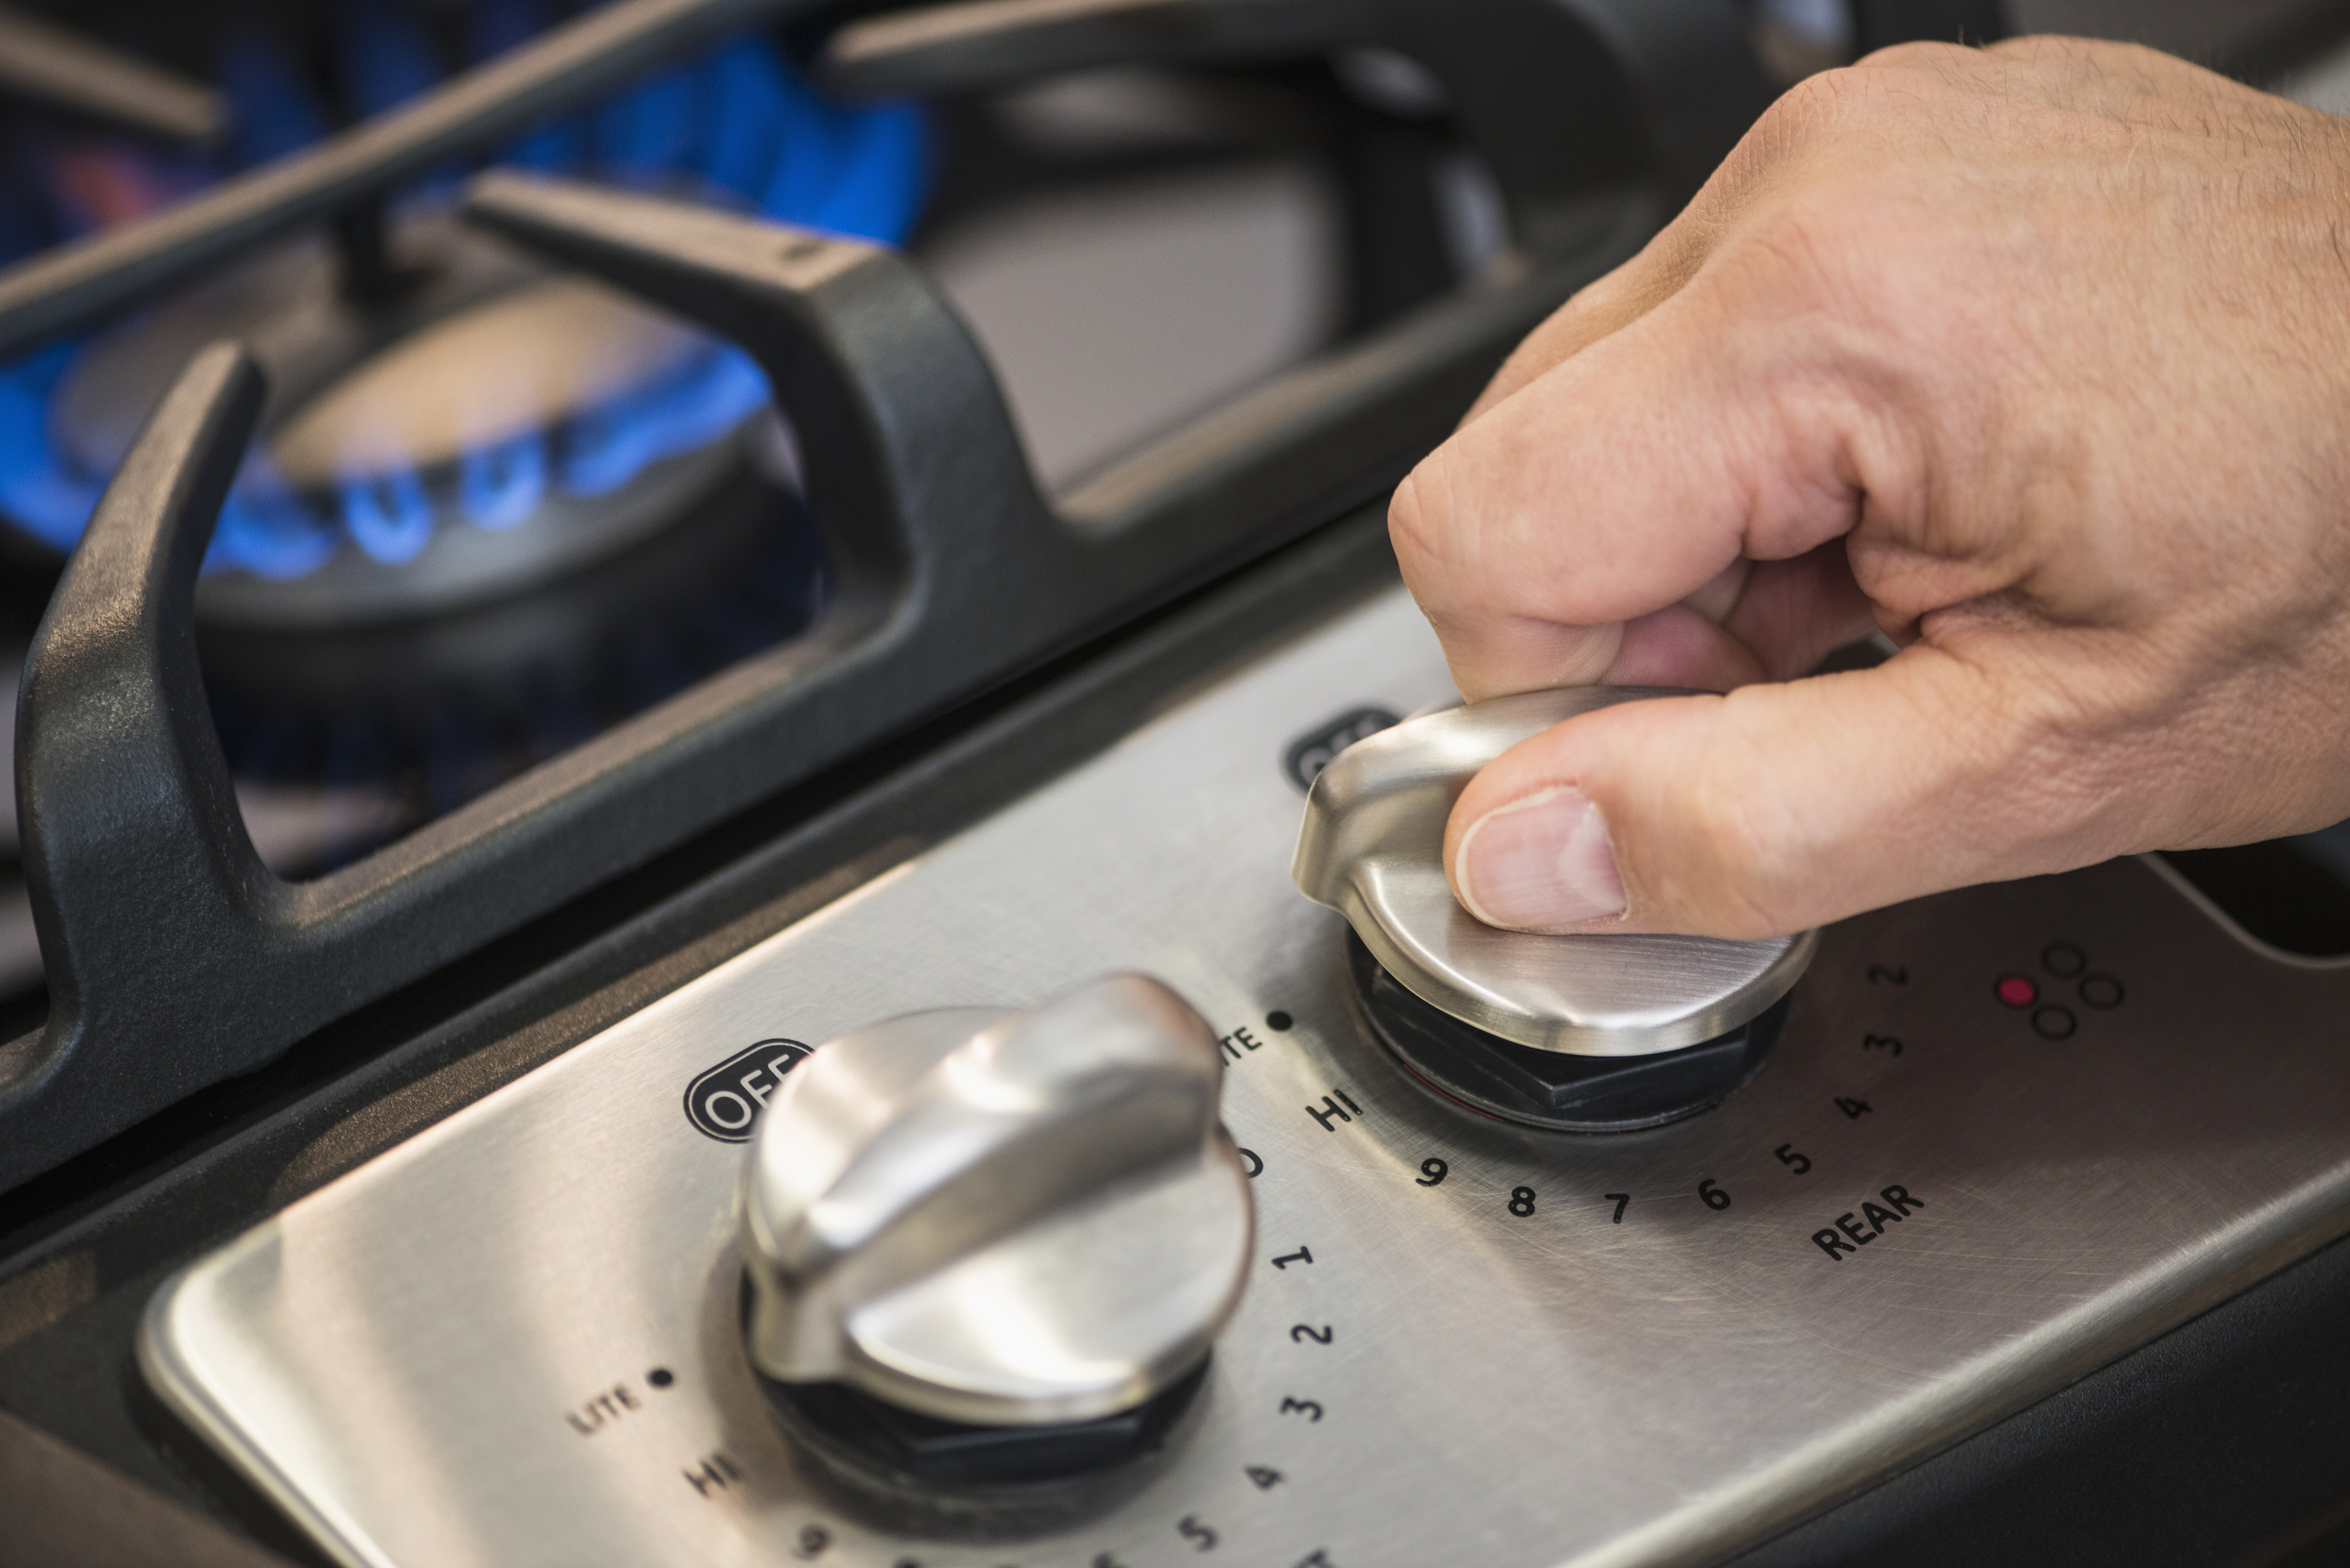 5 Common Stove Top Problems and How to Fix Them